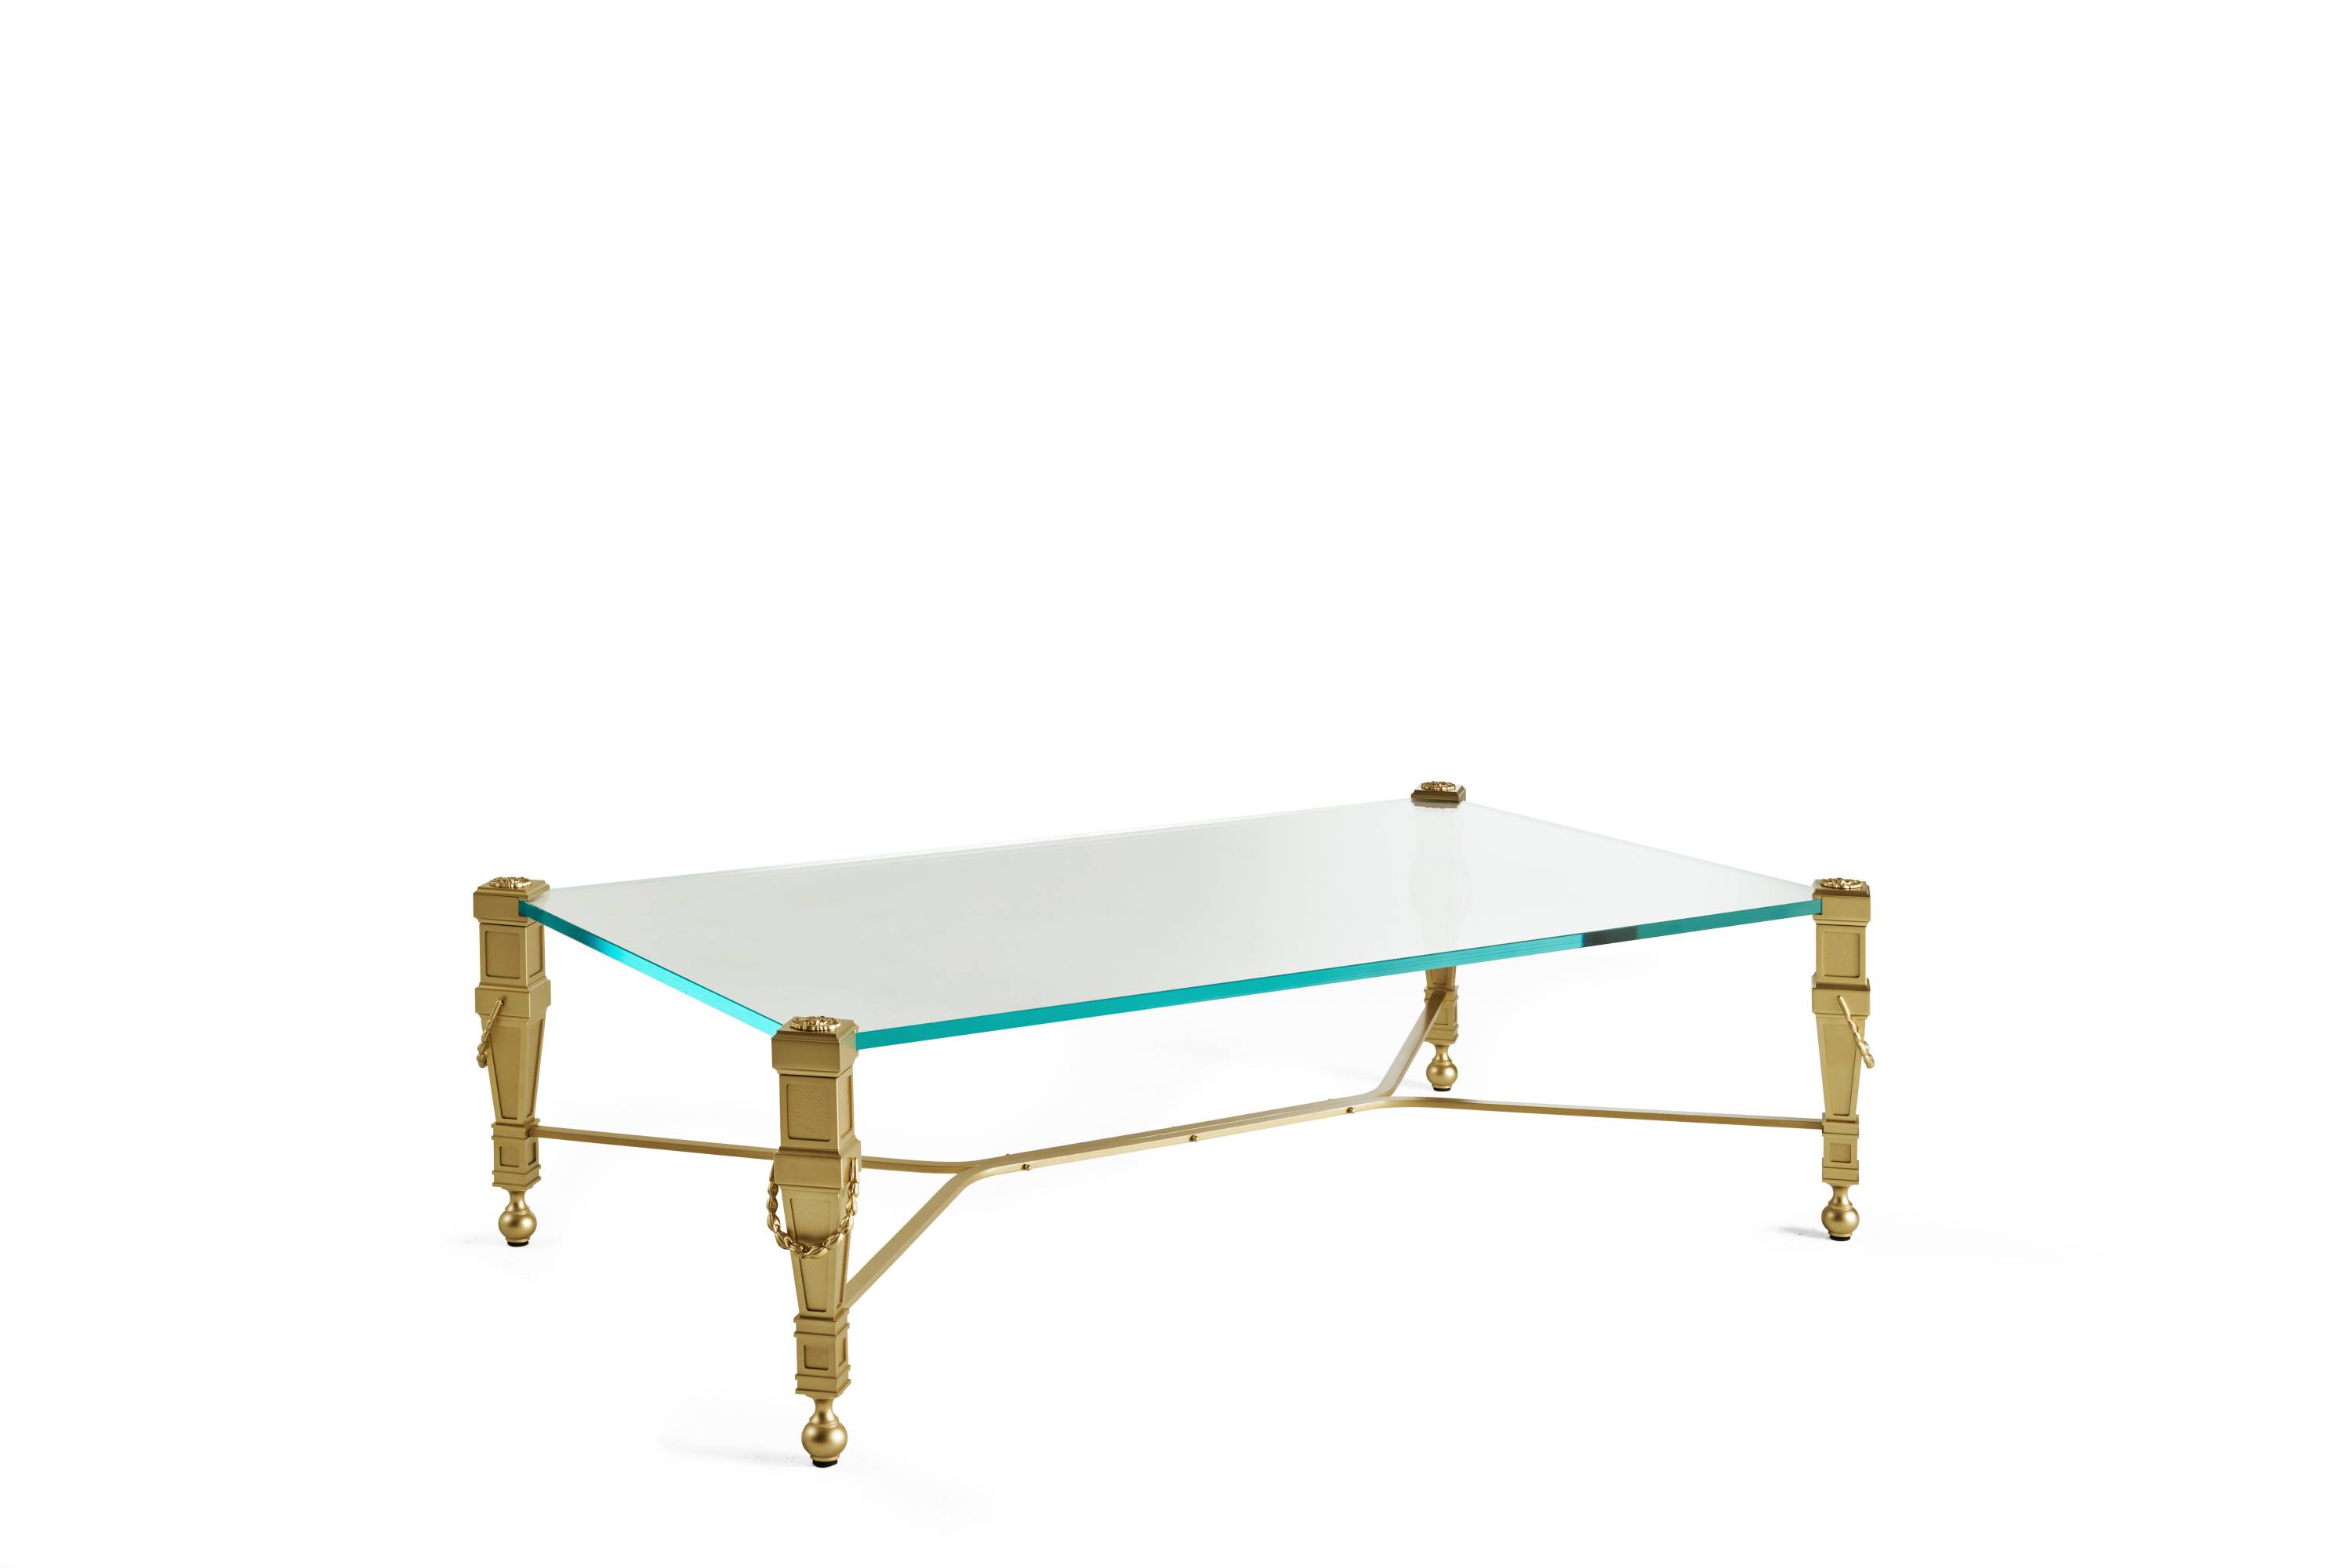 GIOVE low table - A luxury experience with the Héritage collection and its classic luxurious furniture